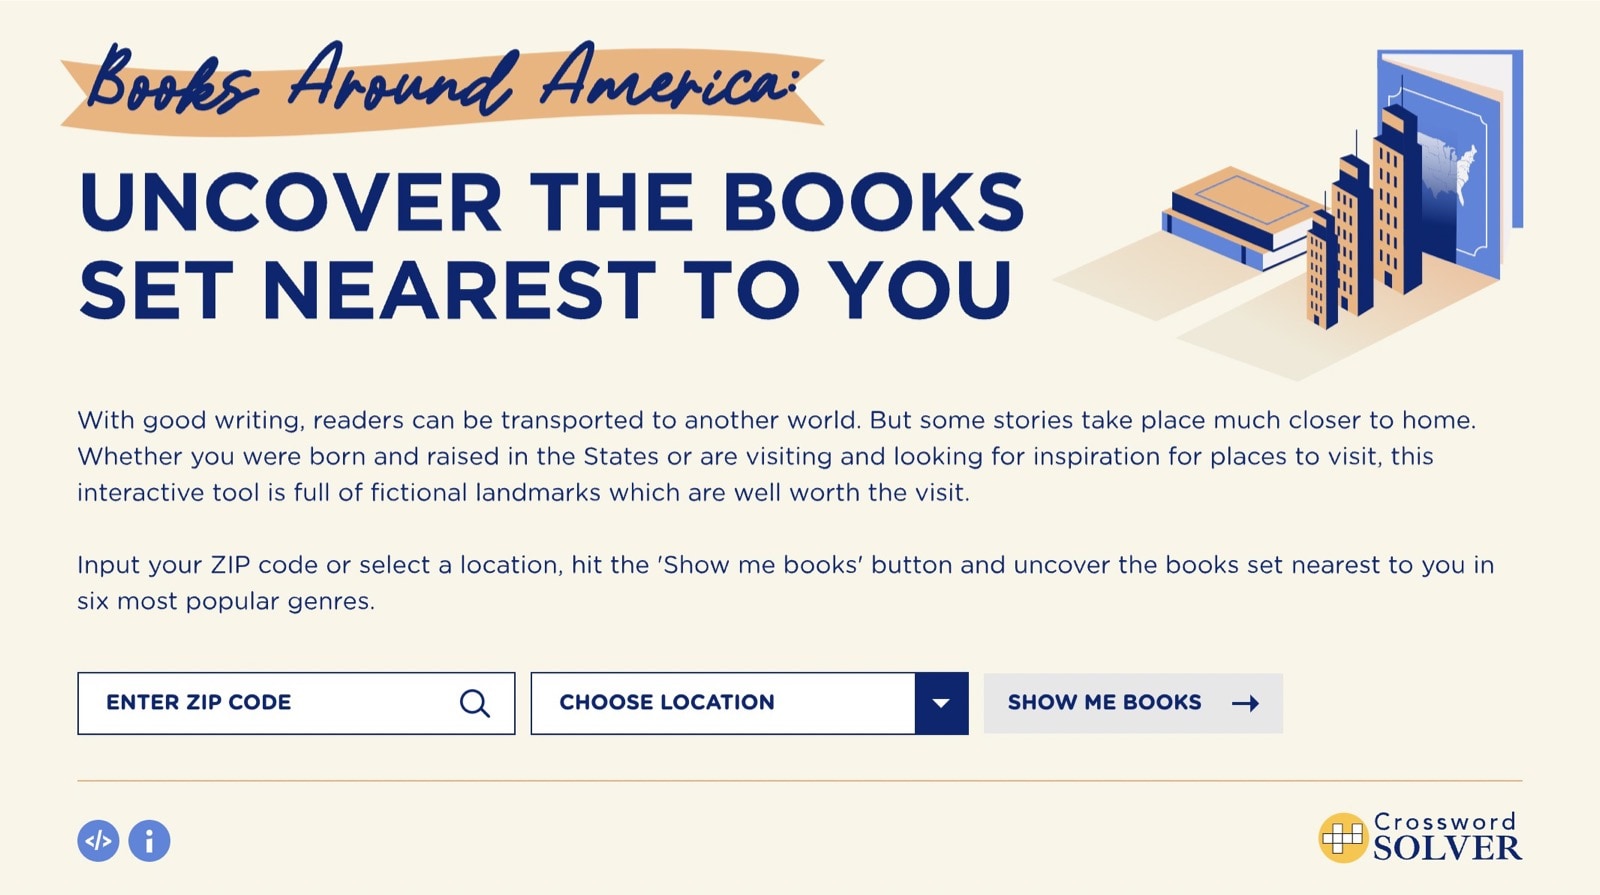 This online tool helps discover the books set nearest to you